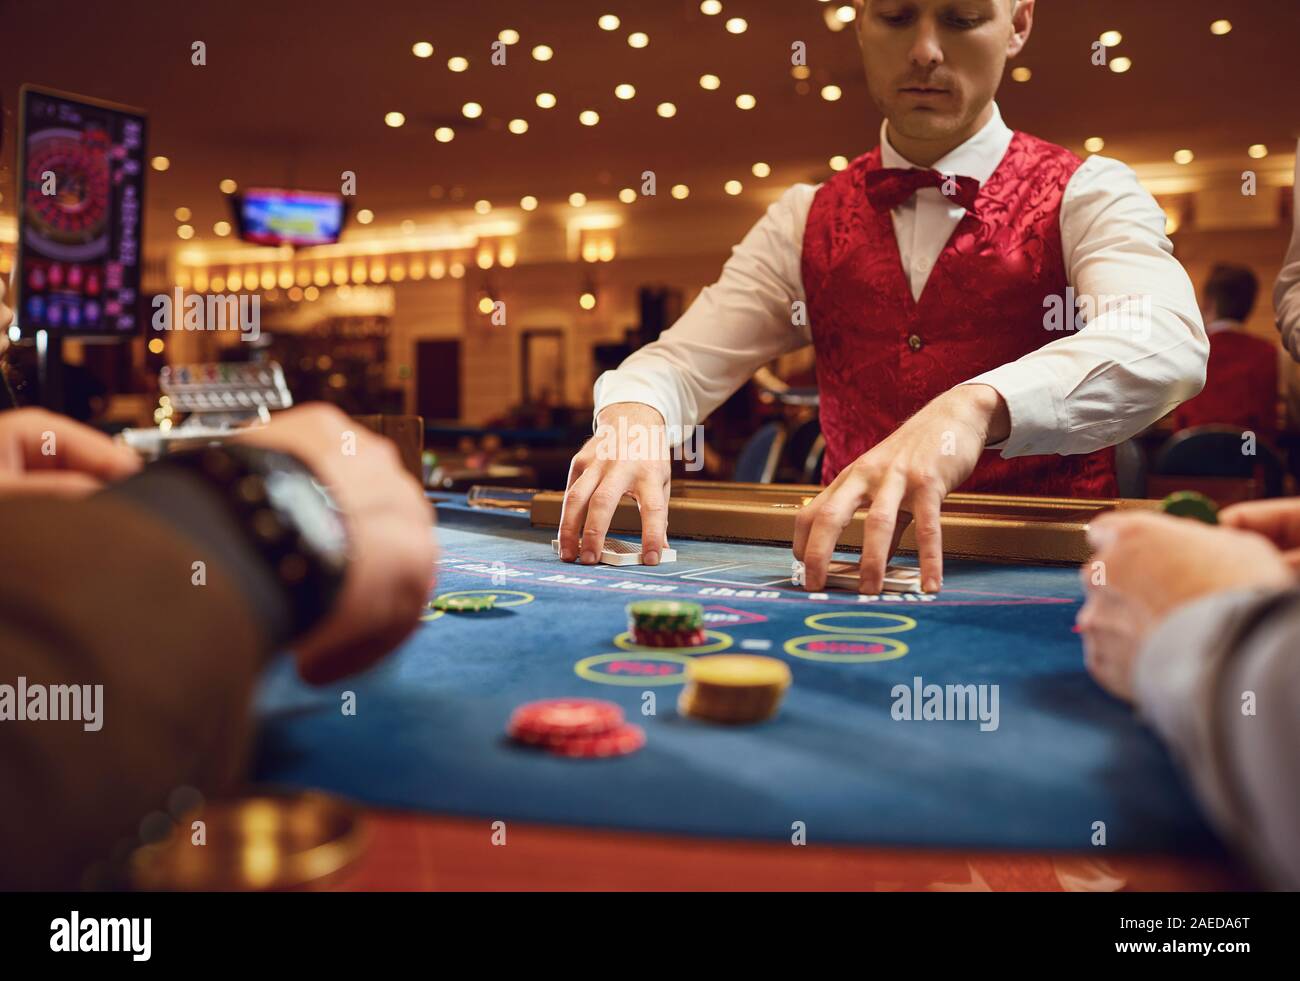 The Croupier Holds Poker Cards In His Hands At A Table In A Casino